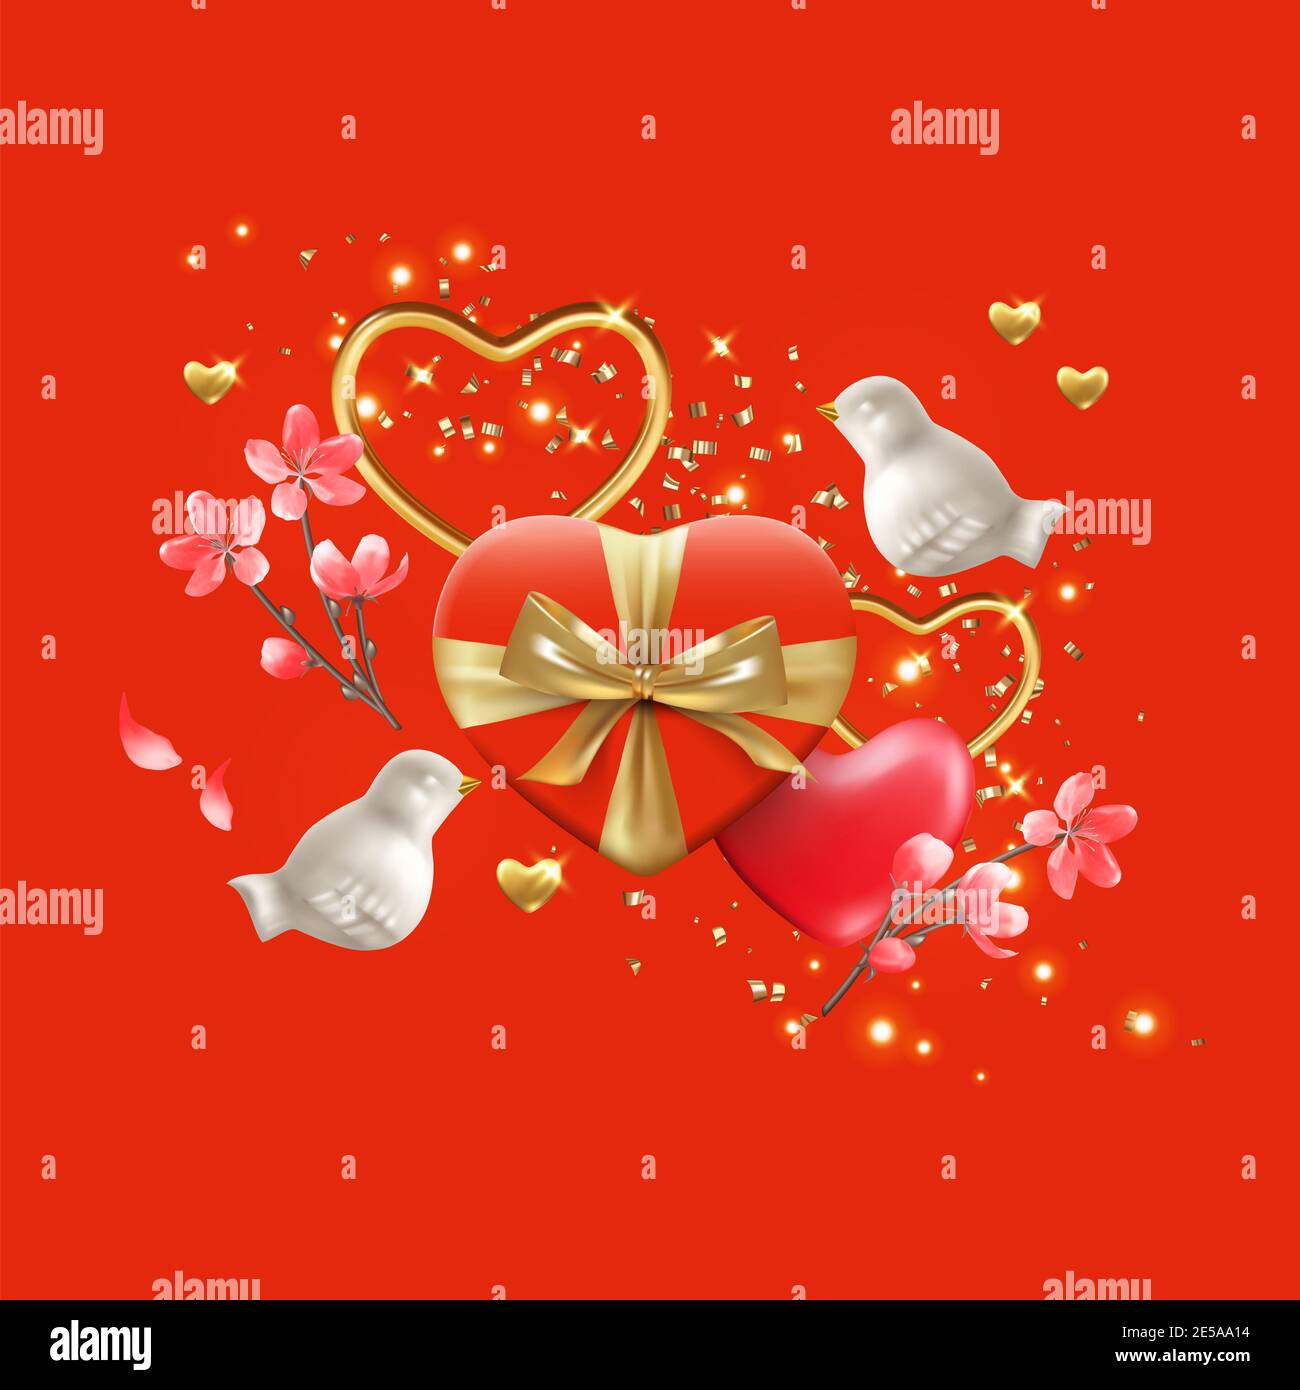 animated free gif: happy valentines day 3d gif animation free download  Valentines photos illustrations Free Photos Holidays and Events Valentines  Day Hand Make Heart Shape Picture of Red heart shape decorationheart  of